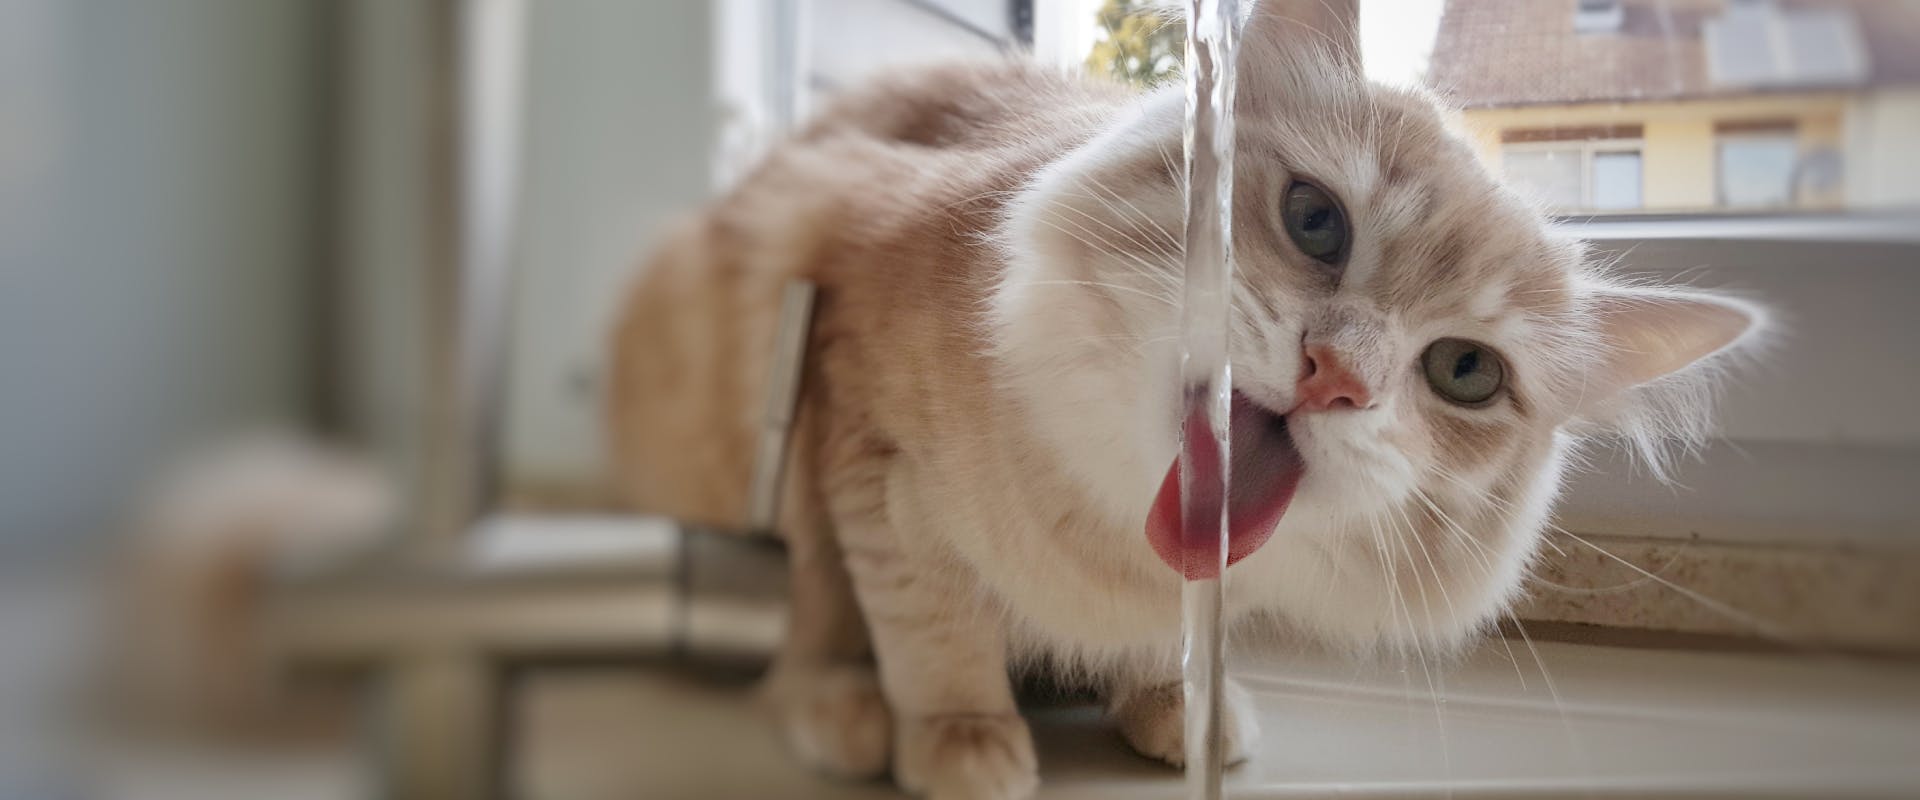 a cat sticking its tongue out to drink from a running tap